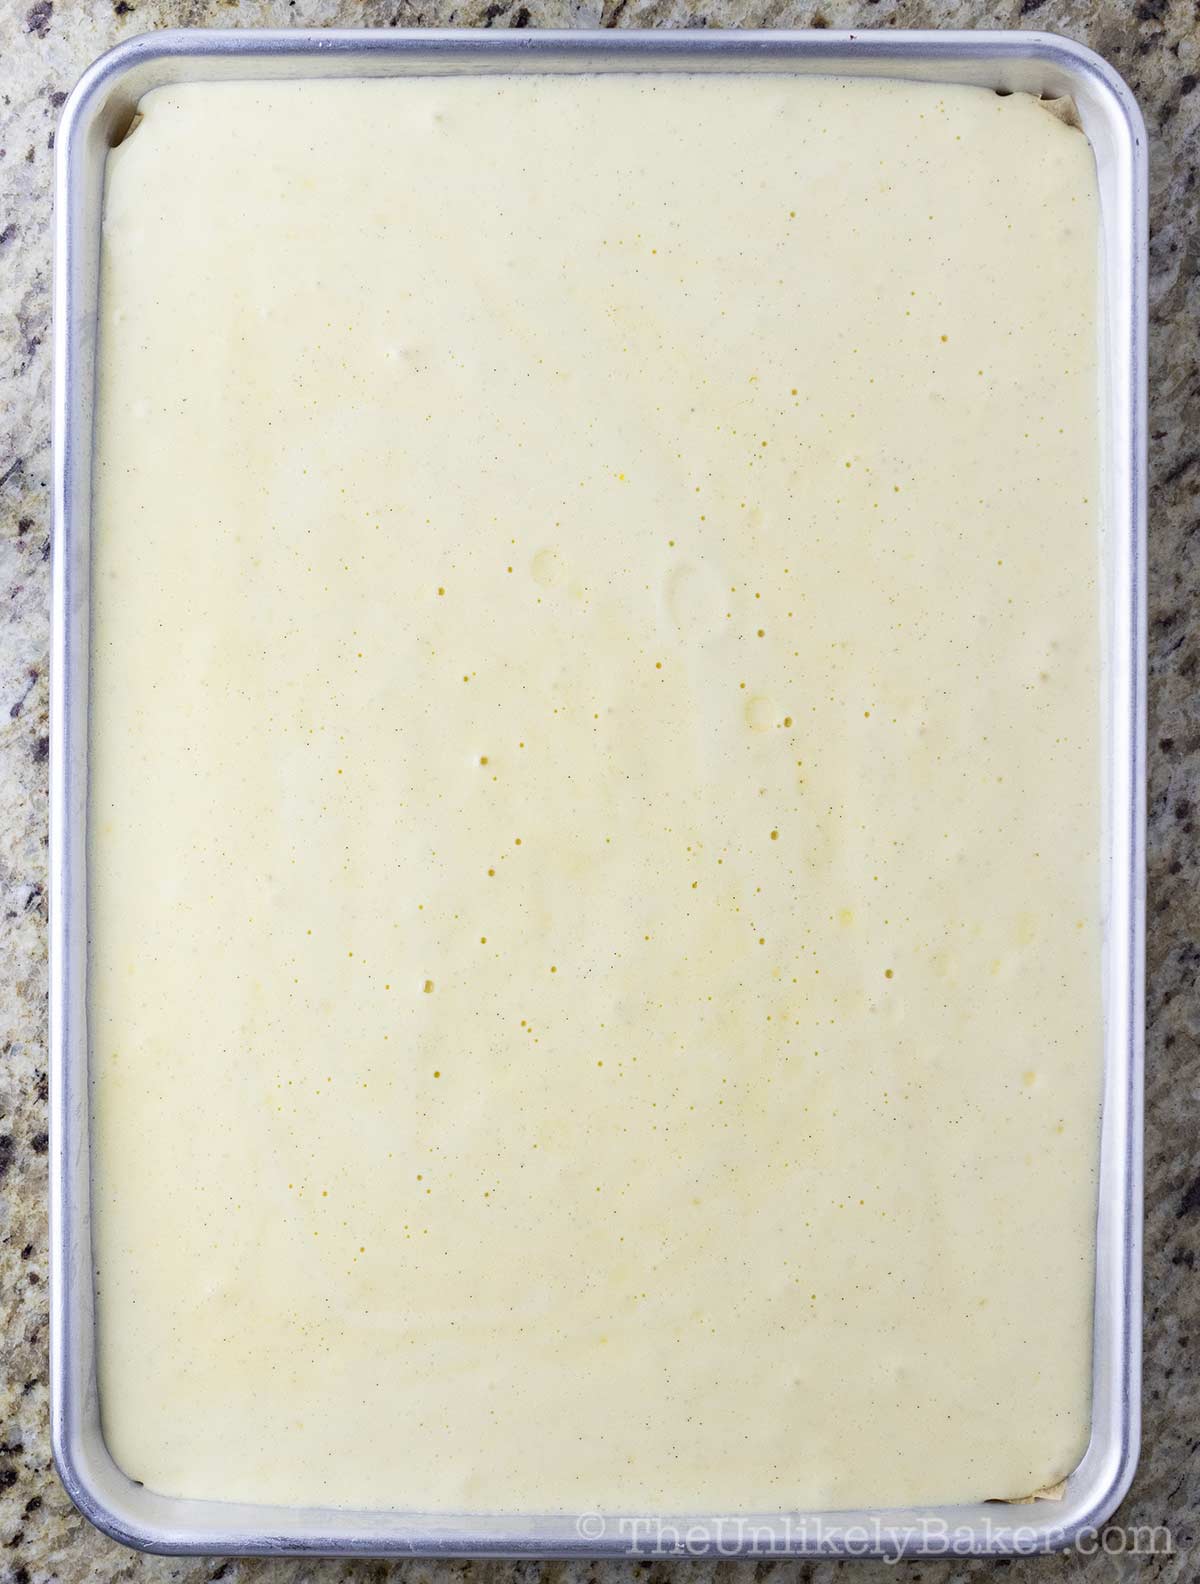 Cake batter in jelly roll pan.